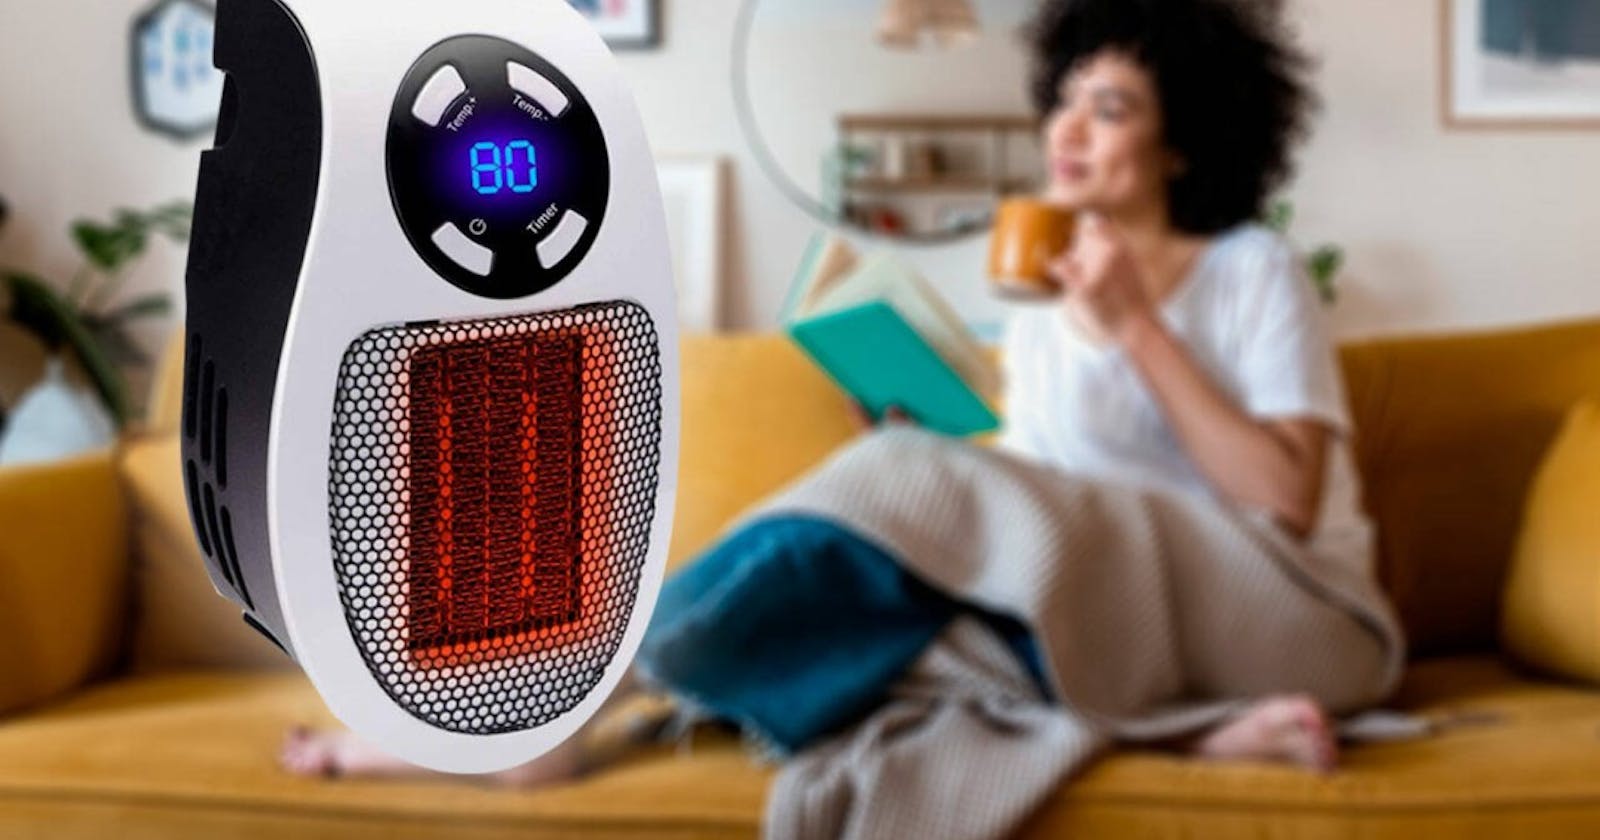 Toasty Heater Don't Buy Before Read Official Reviews!